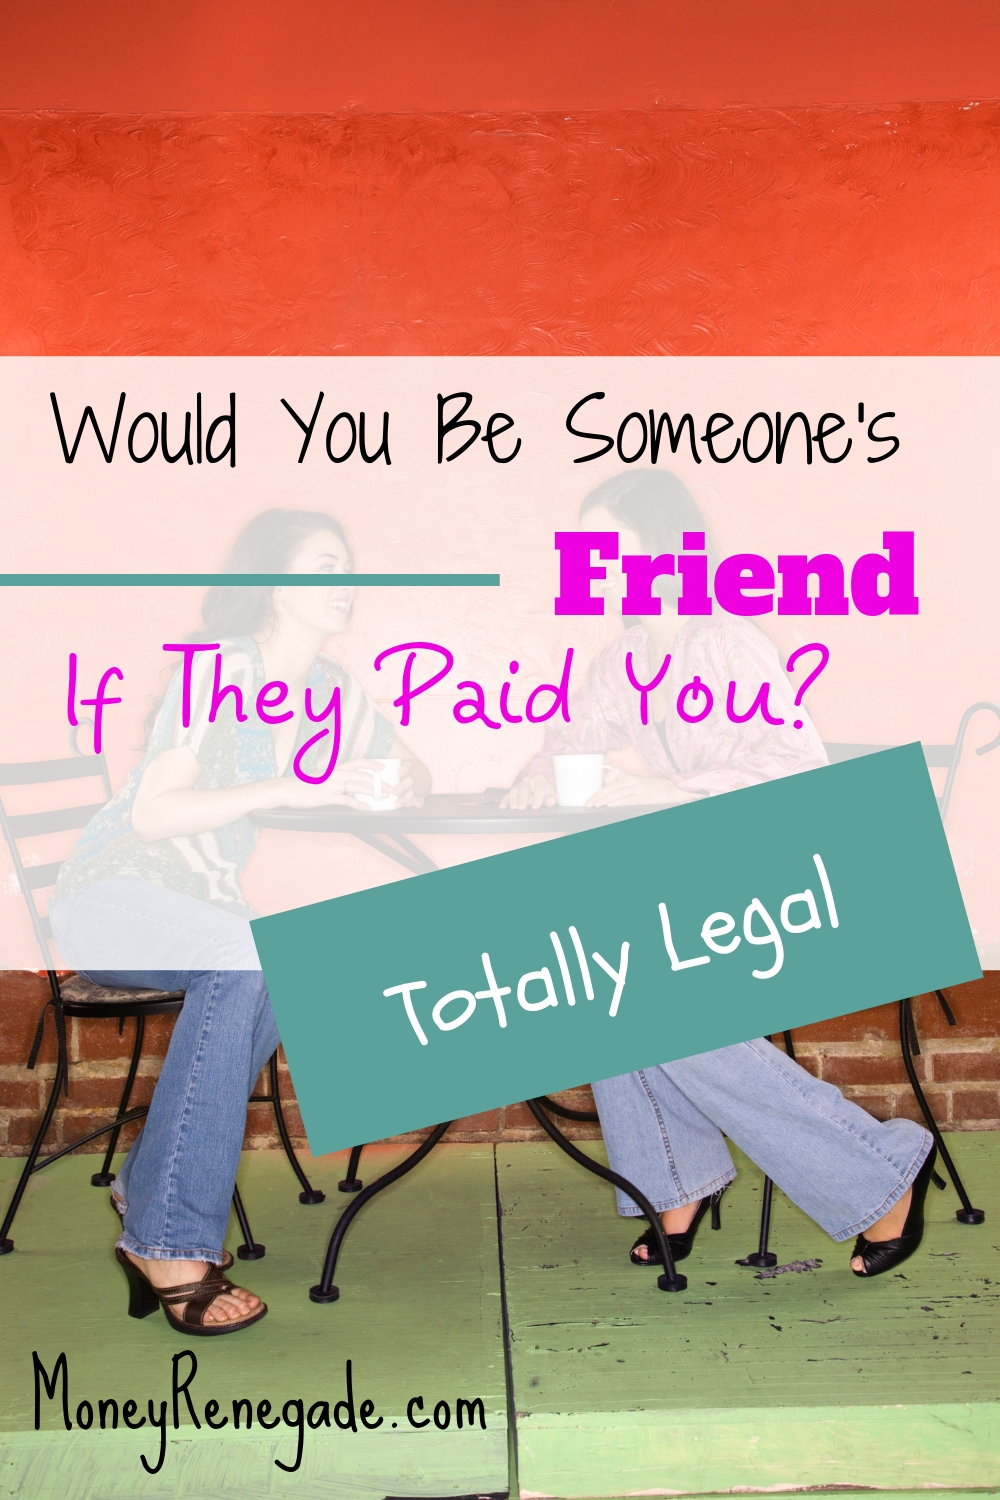 Would You Be Someone’s Friend If They Paid You?